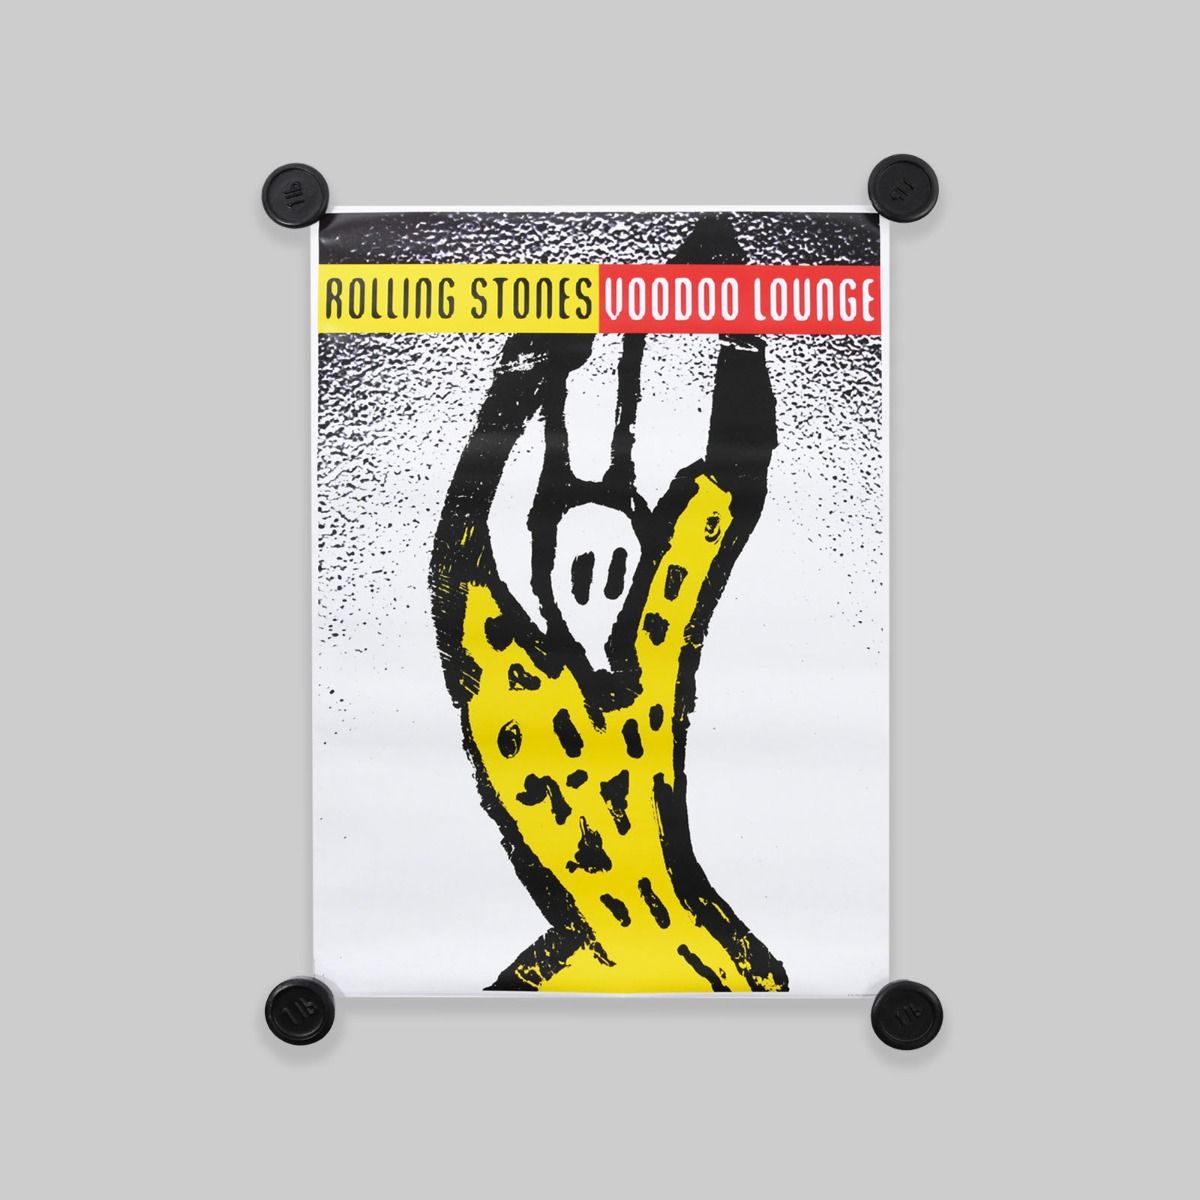 The Rolling Stones Voodoo Lounge A1 Poster